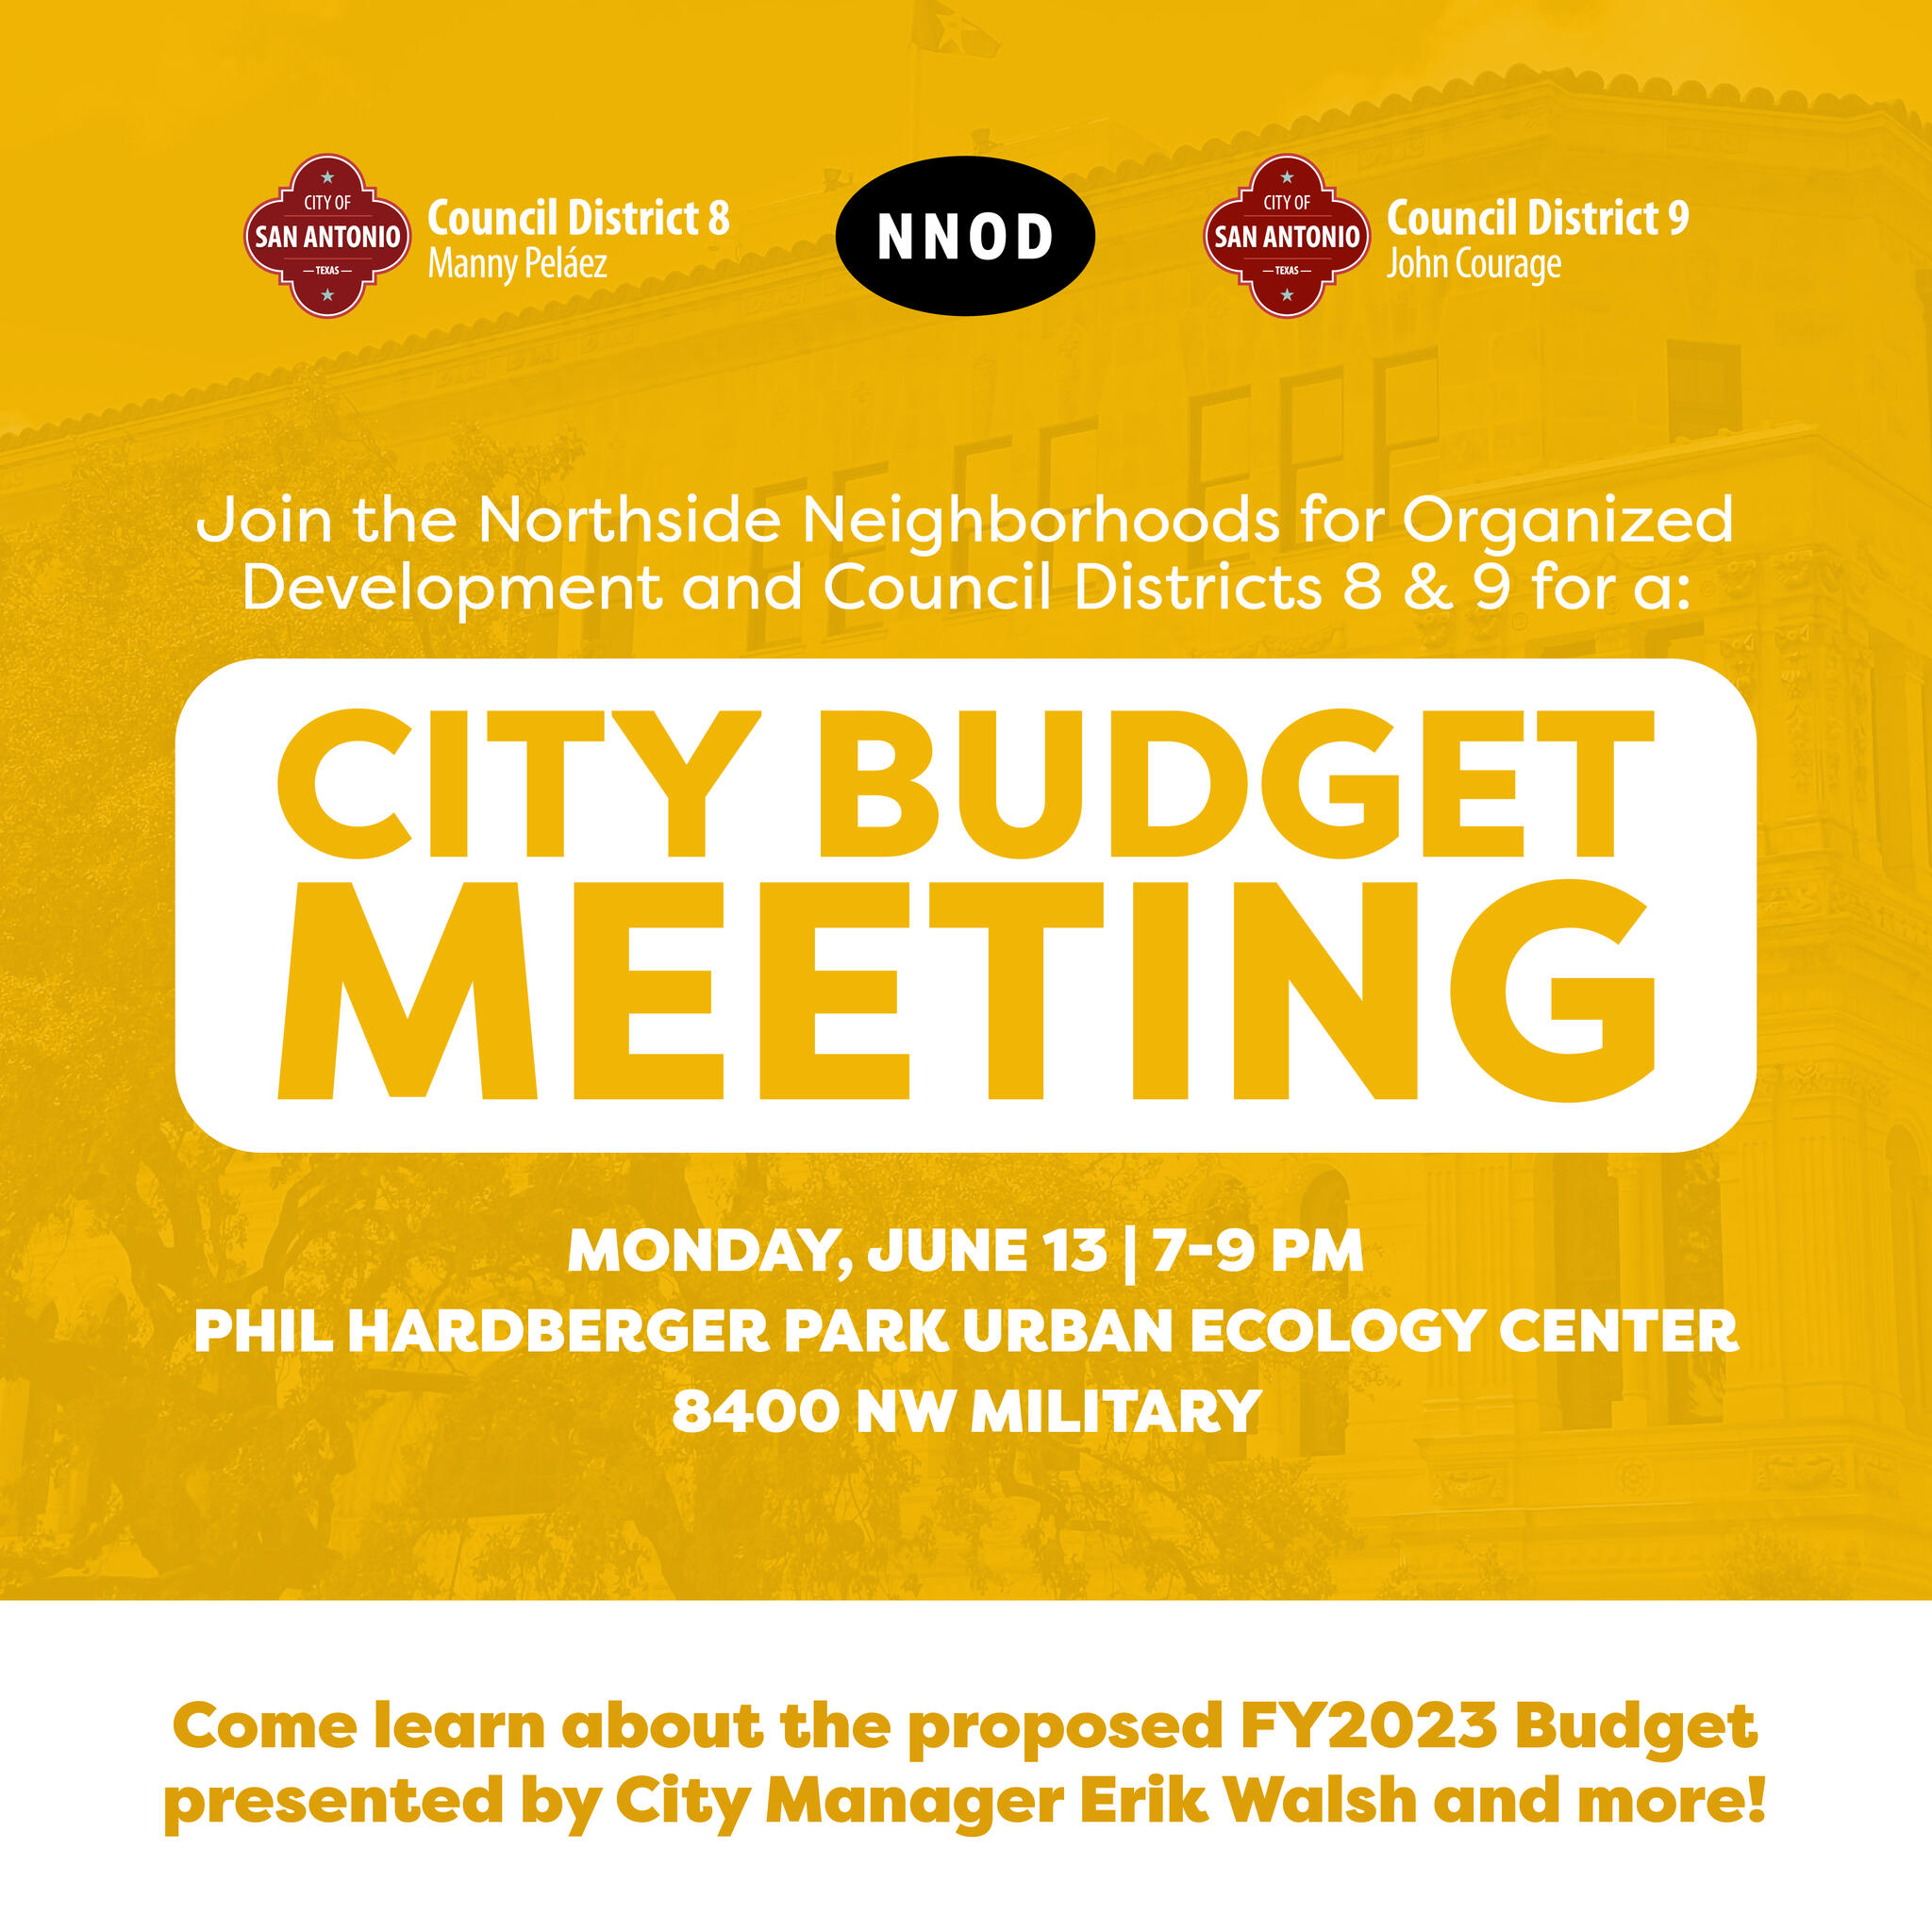 Let's talk about the FY 2023 City Budget! (City of San Antonio Mayor